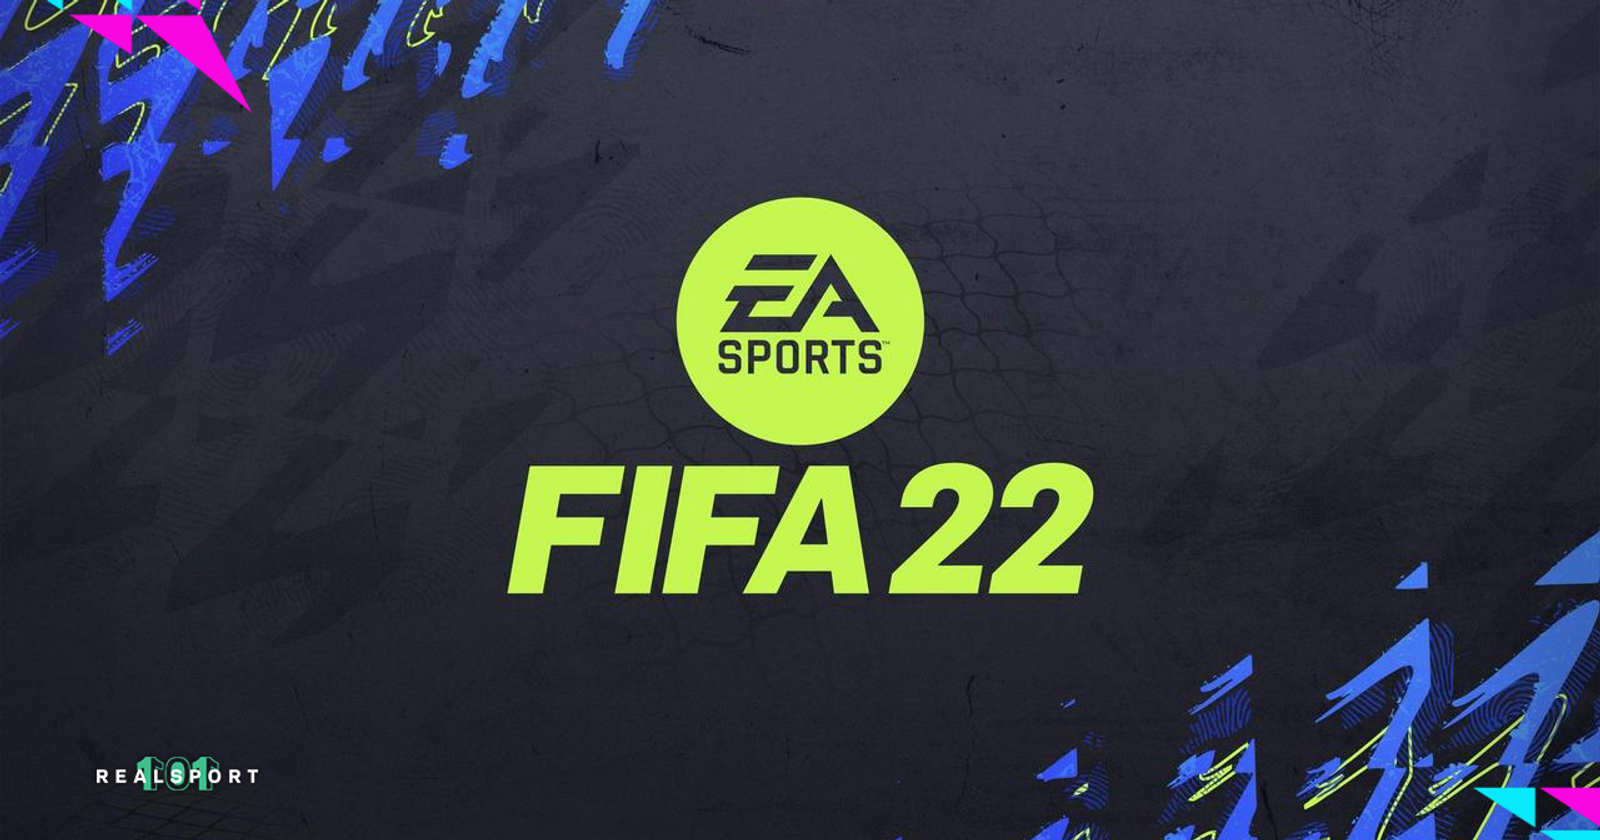 FIFA 22 Download Size For PlayStation 5 Revealed Ahead of Release